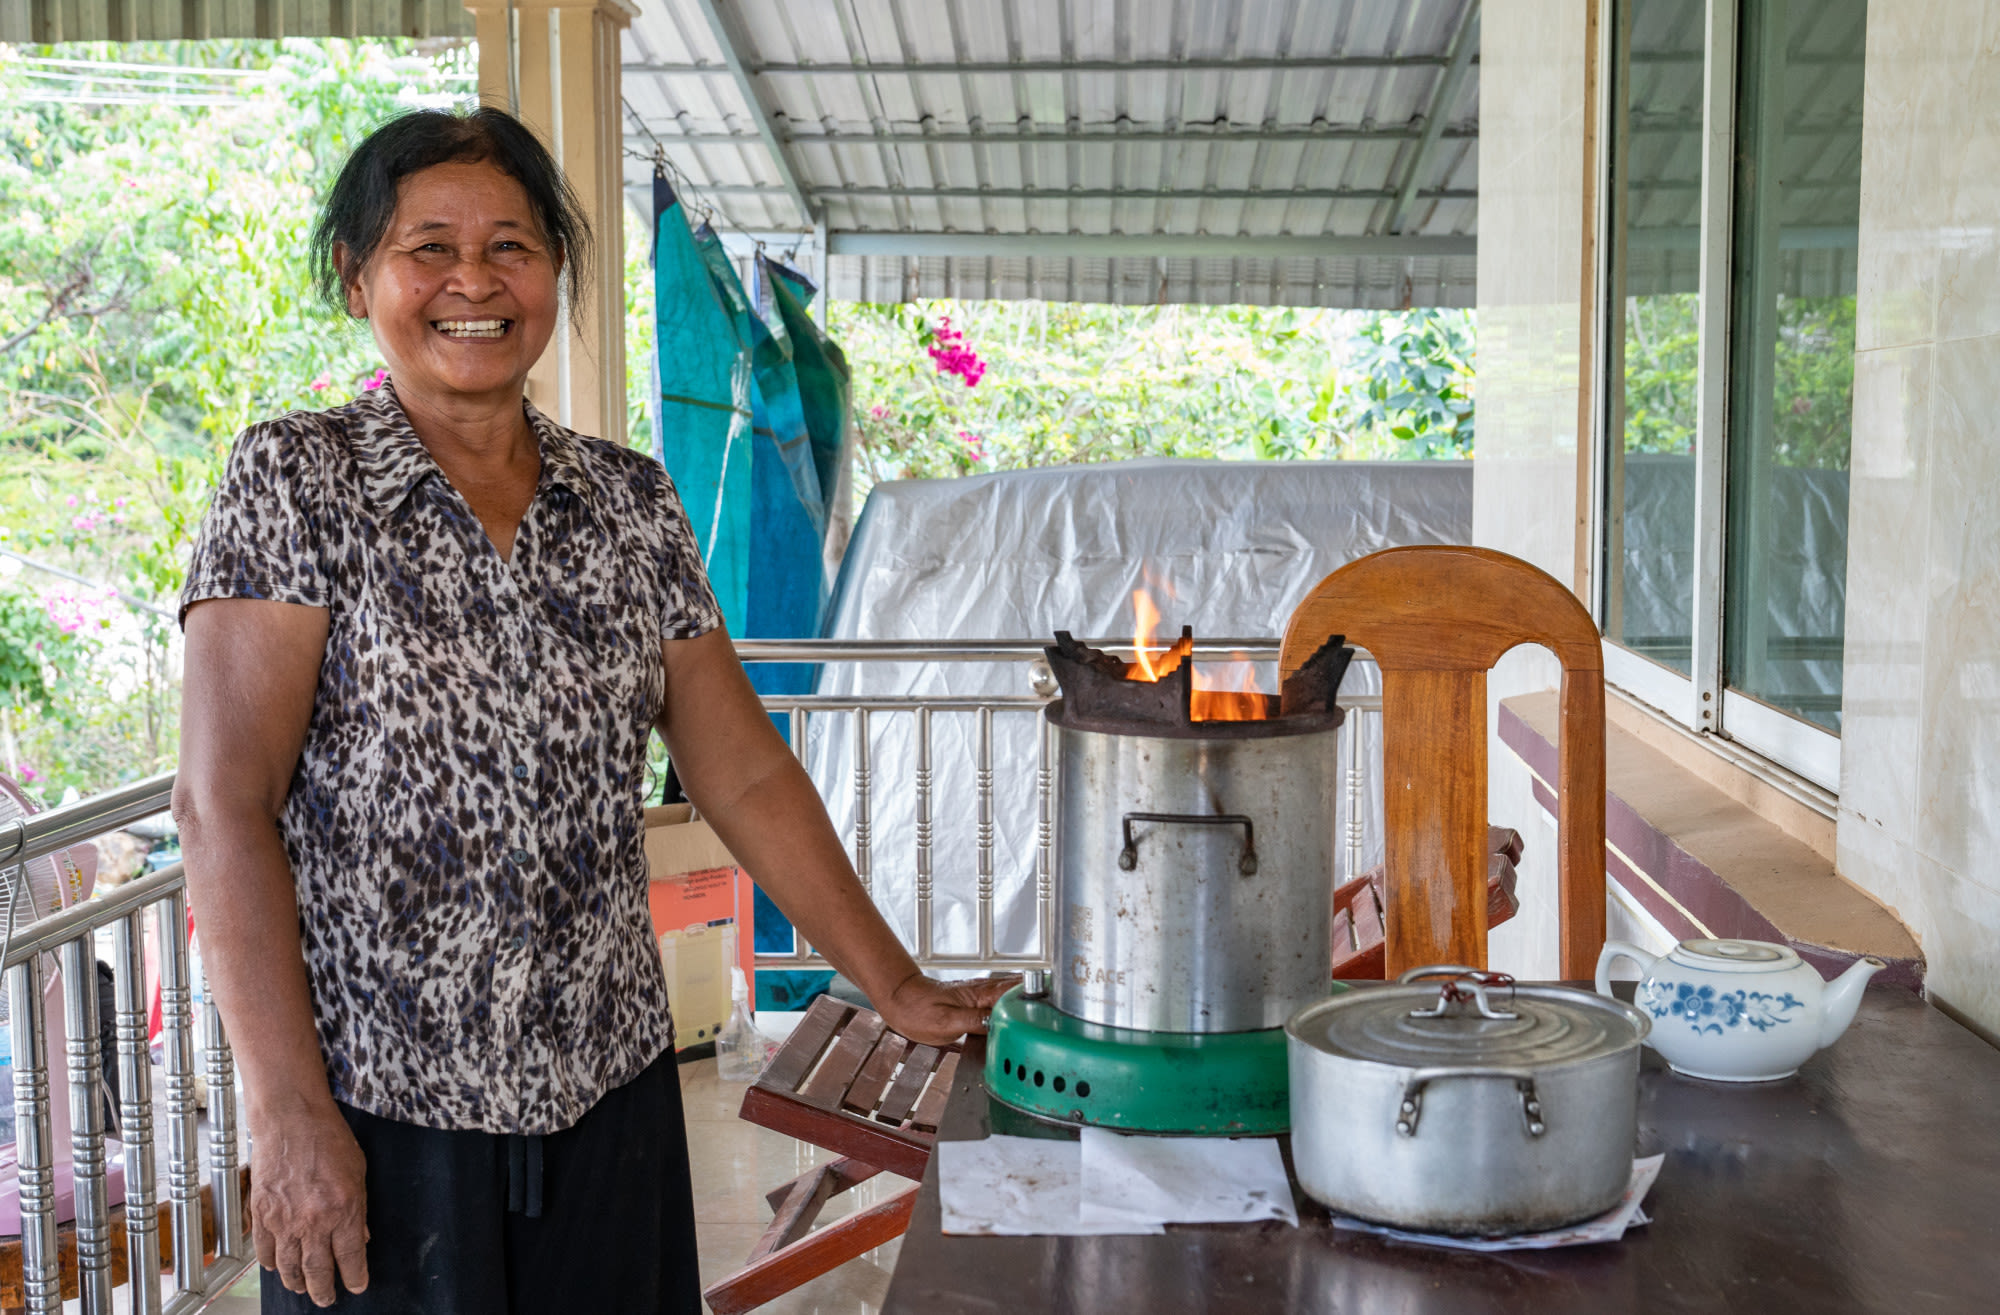 A Kiva loan to Ren helped to purchase the ACE One energy system to access solar power for lighting, charging and cooking.